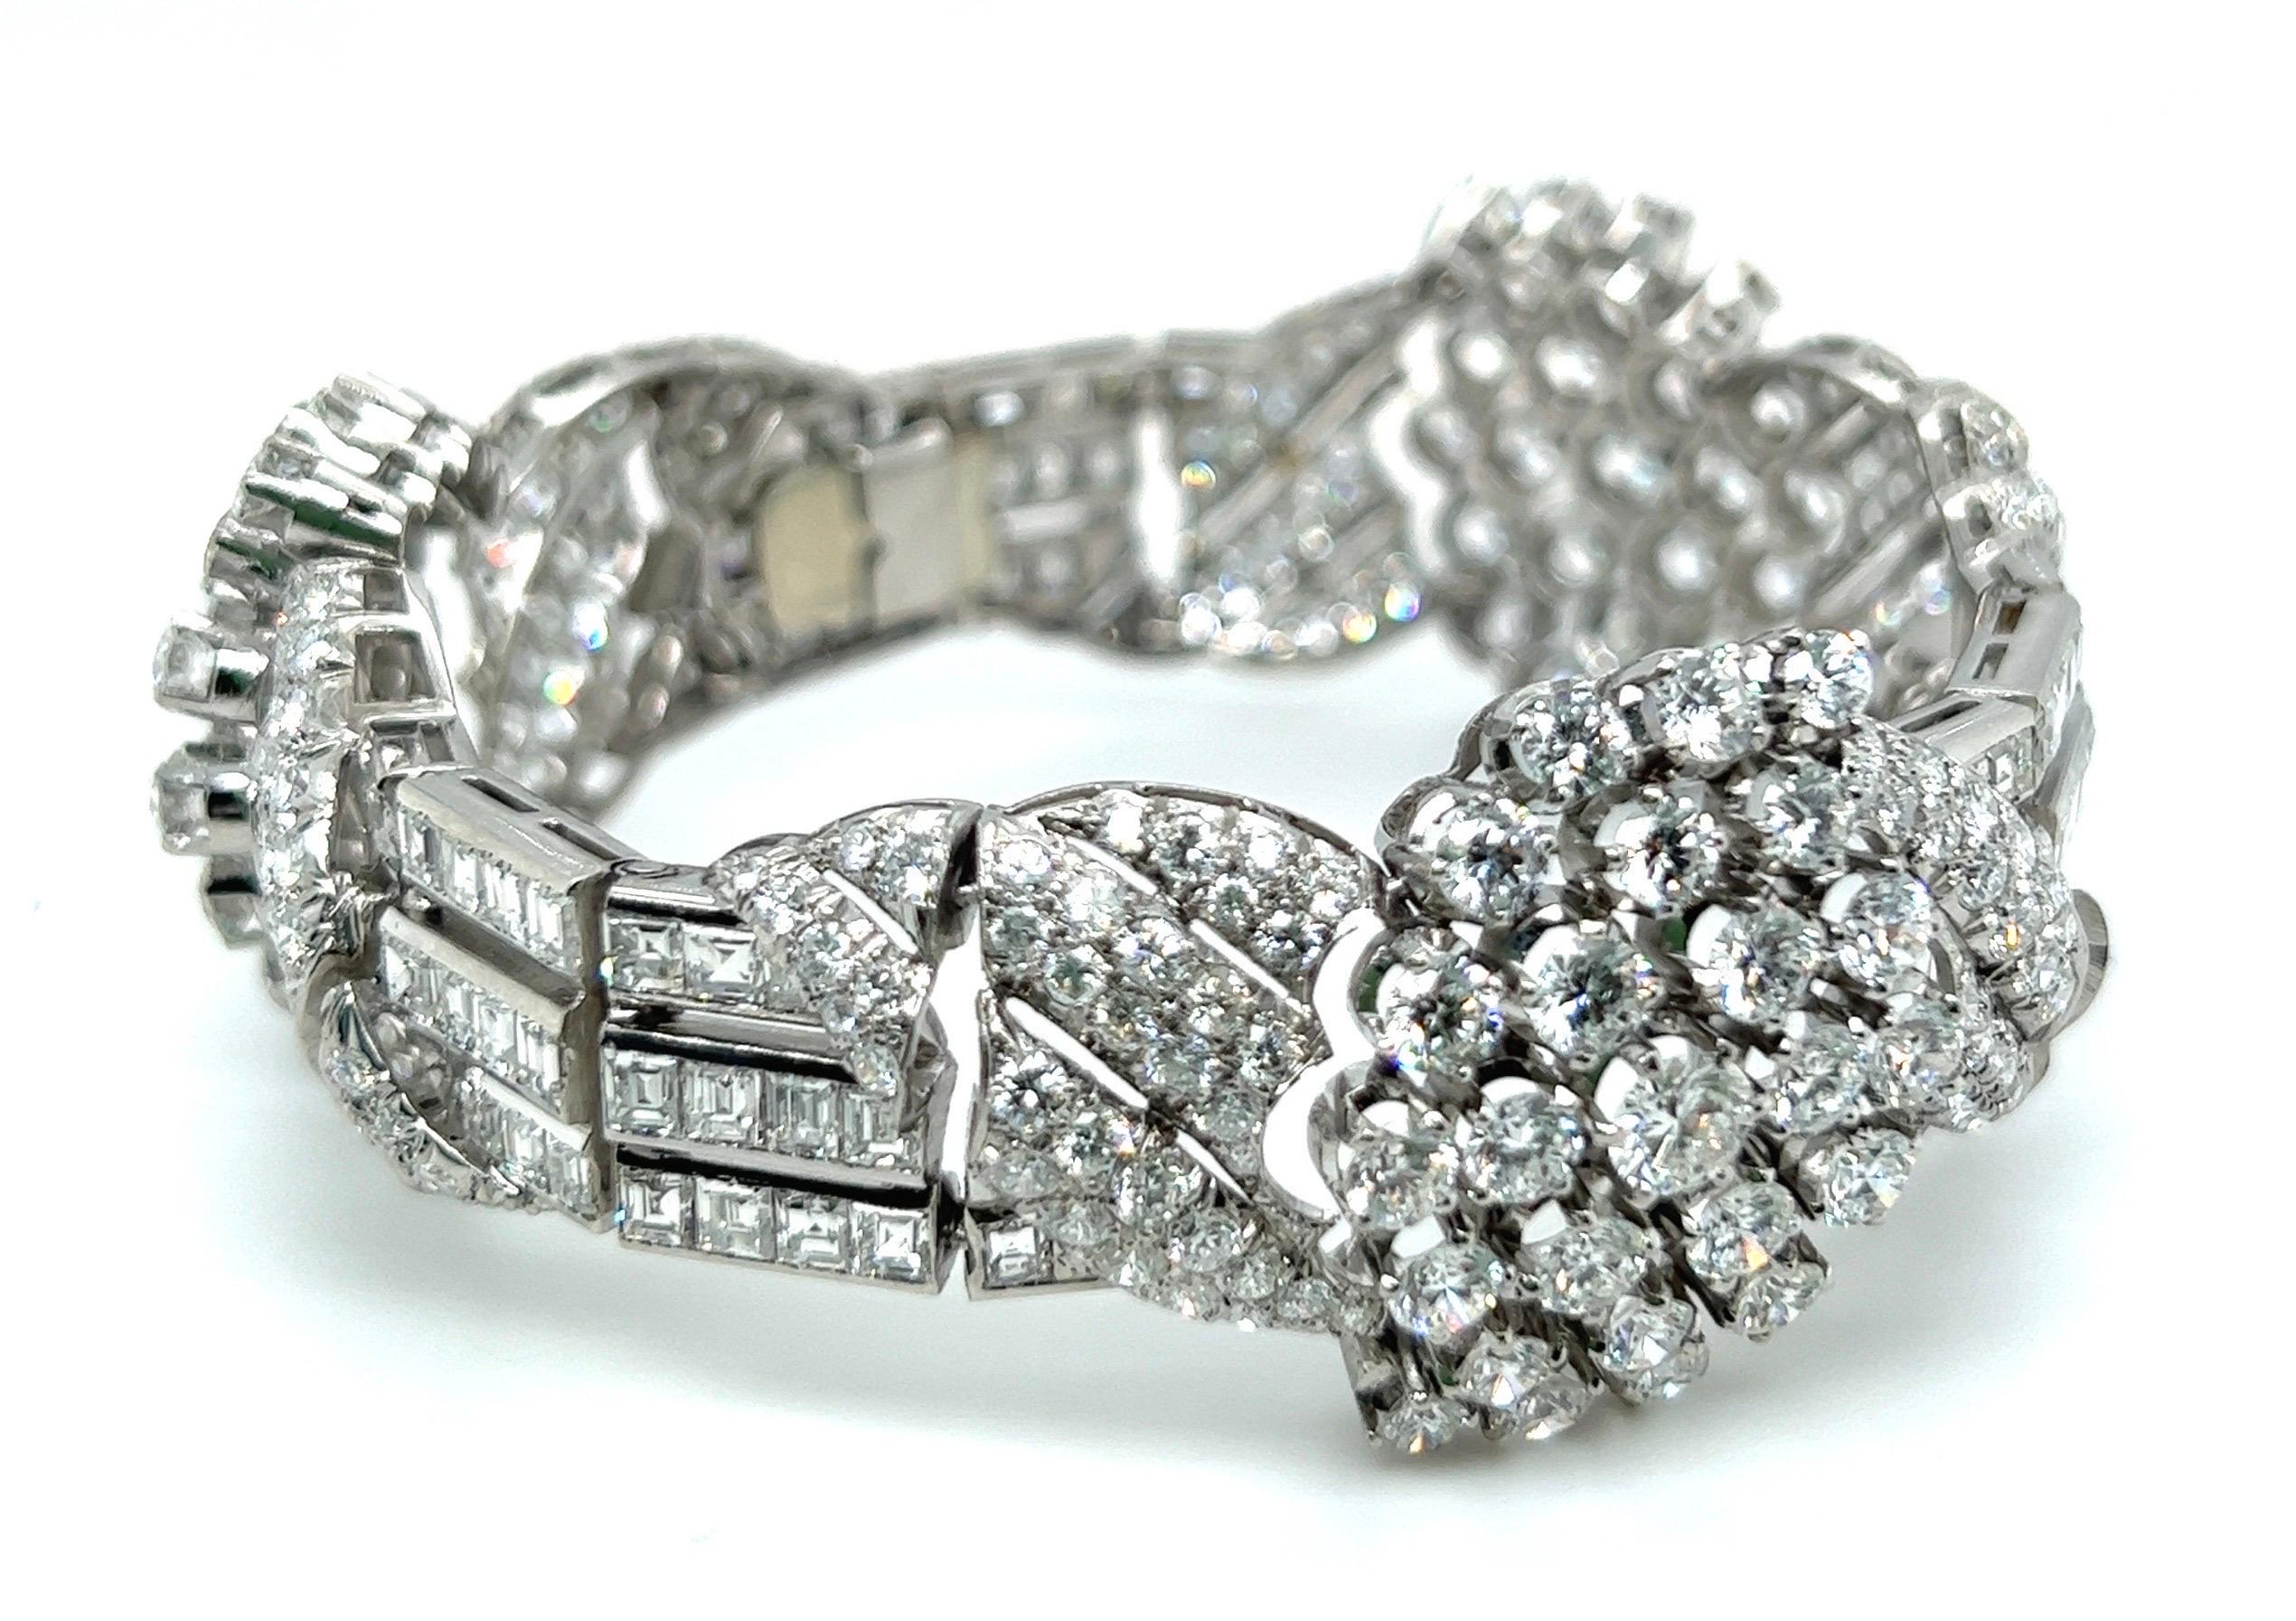 Opulent and ladylike circa 25 carat diamond and platinum cocktail bracelet, circa 1950s.

Elegant bracelet of floral design, entirely crafted in platinum and set with 75 brilliant-cut diamonds totalling circa 11 carats, 234 smaller brilliant-cut